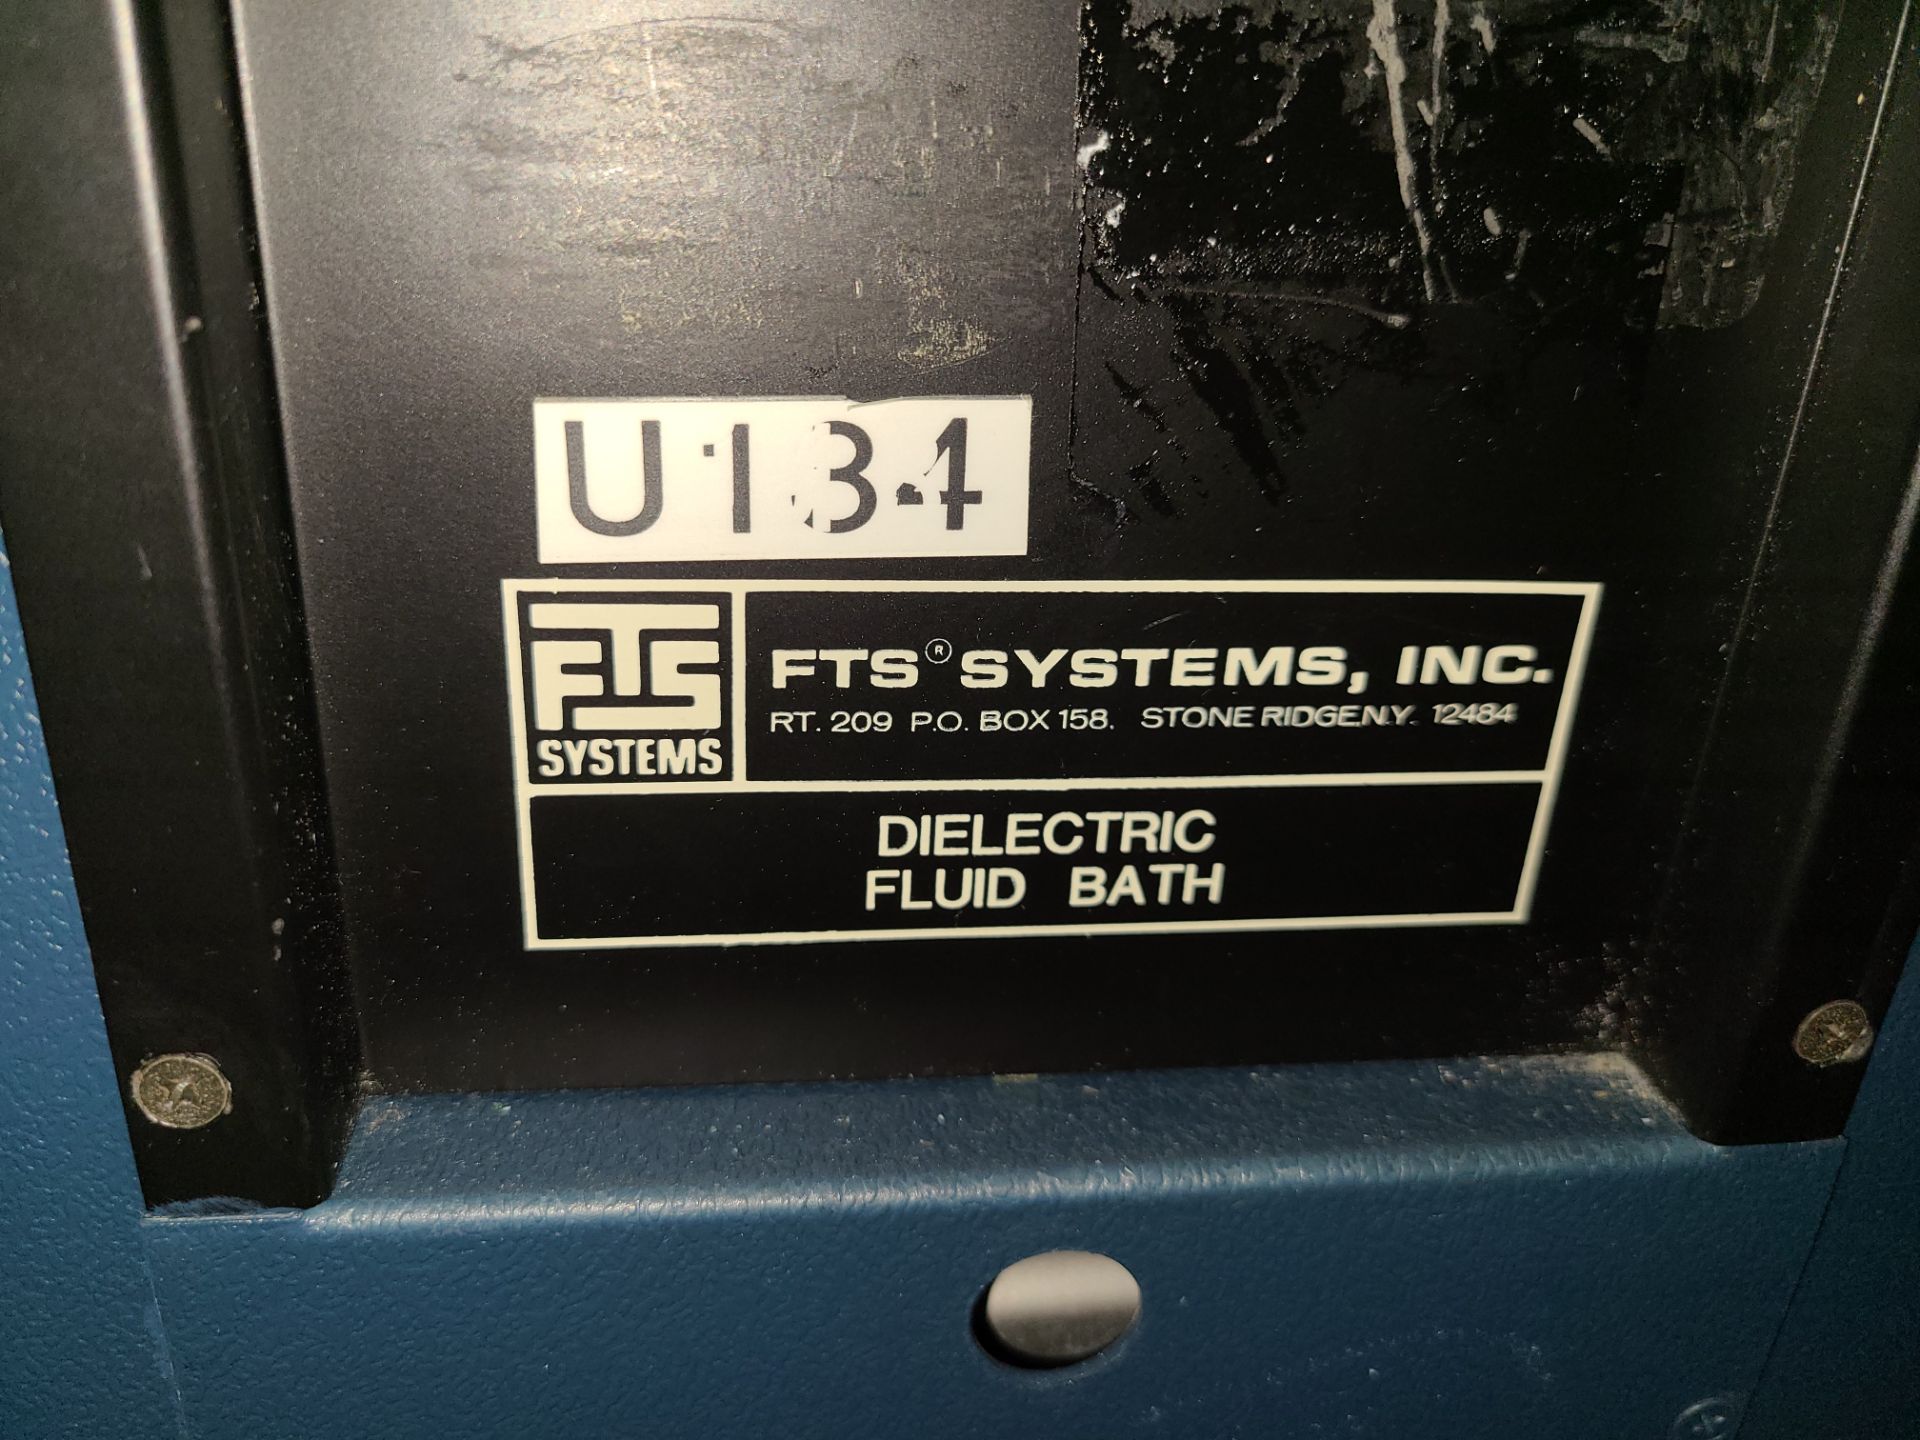 FTS SYSTEMS DFB-75A-0 DIELECTRIC FLUID BATH SERIAL NUMBER DFB-1-86-94 - Image 2 of 2